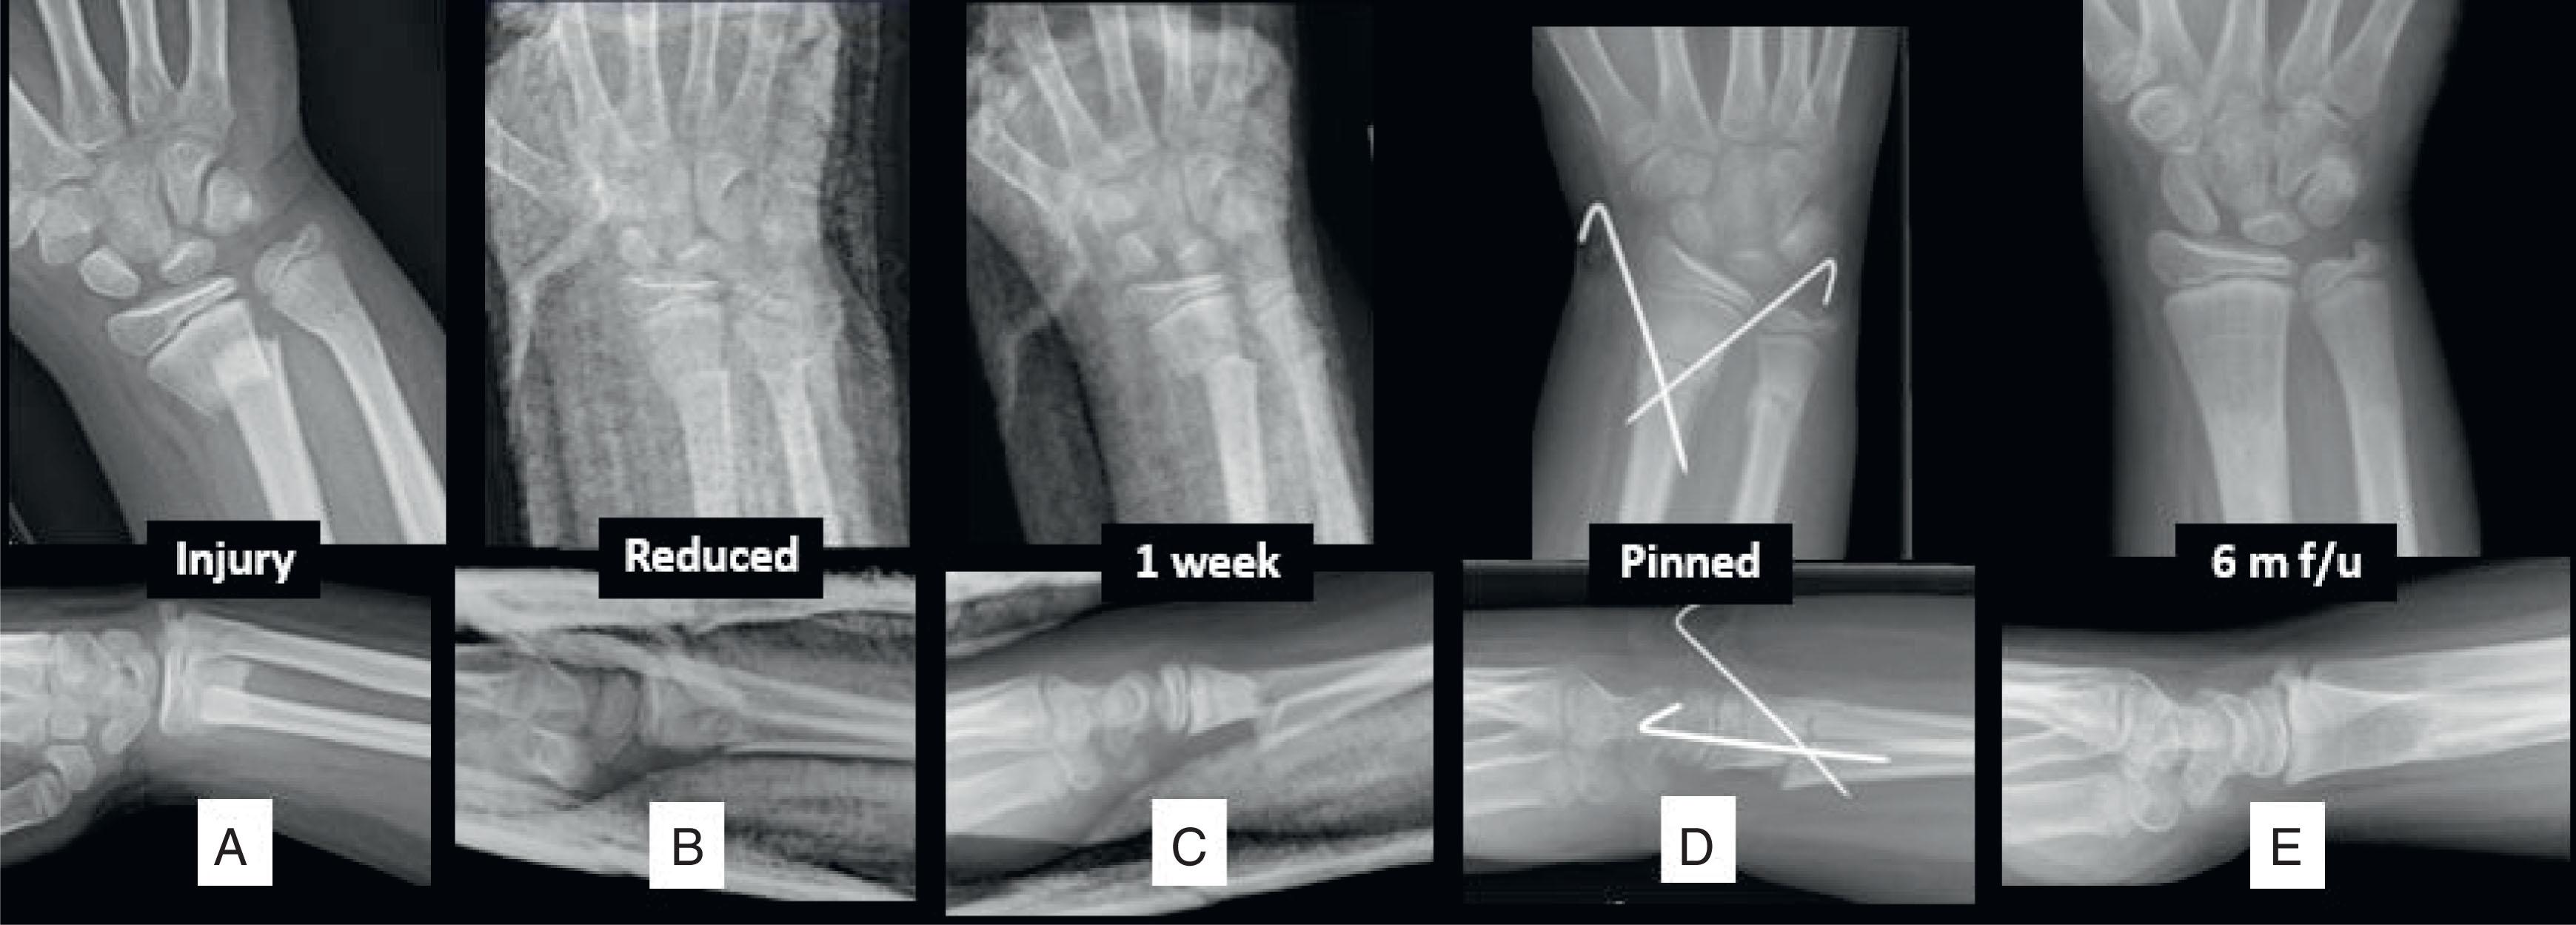 Fig. 6.12, Early Loss of Reduction Followed by Closed Reduction and Percutaneous Pinning. (A) A 9-years-and-9-months–old male presents with completely displaced radius with relatively intact ulna. (B) Initial reduction judged to be satisfactory. (C) Malreduction noted at 1 week’s follow-up. (D) Closed reduction and percutaneous pinning and below elbow casting performed subsequently. (E) Six months’ follow-up showing anatomic alignment.